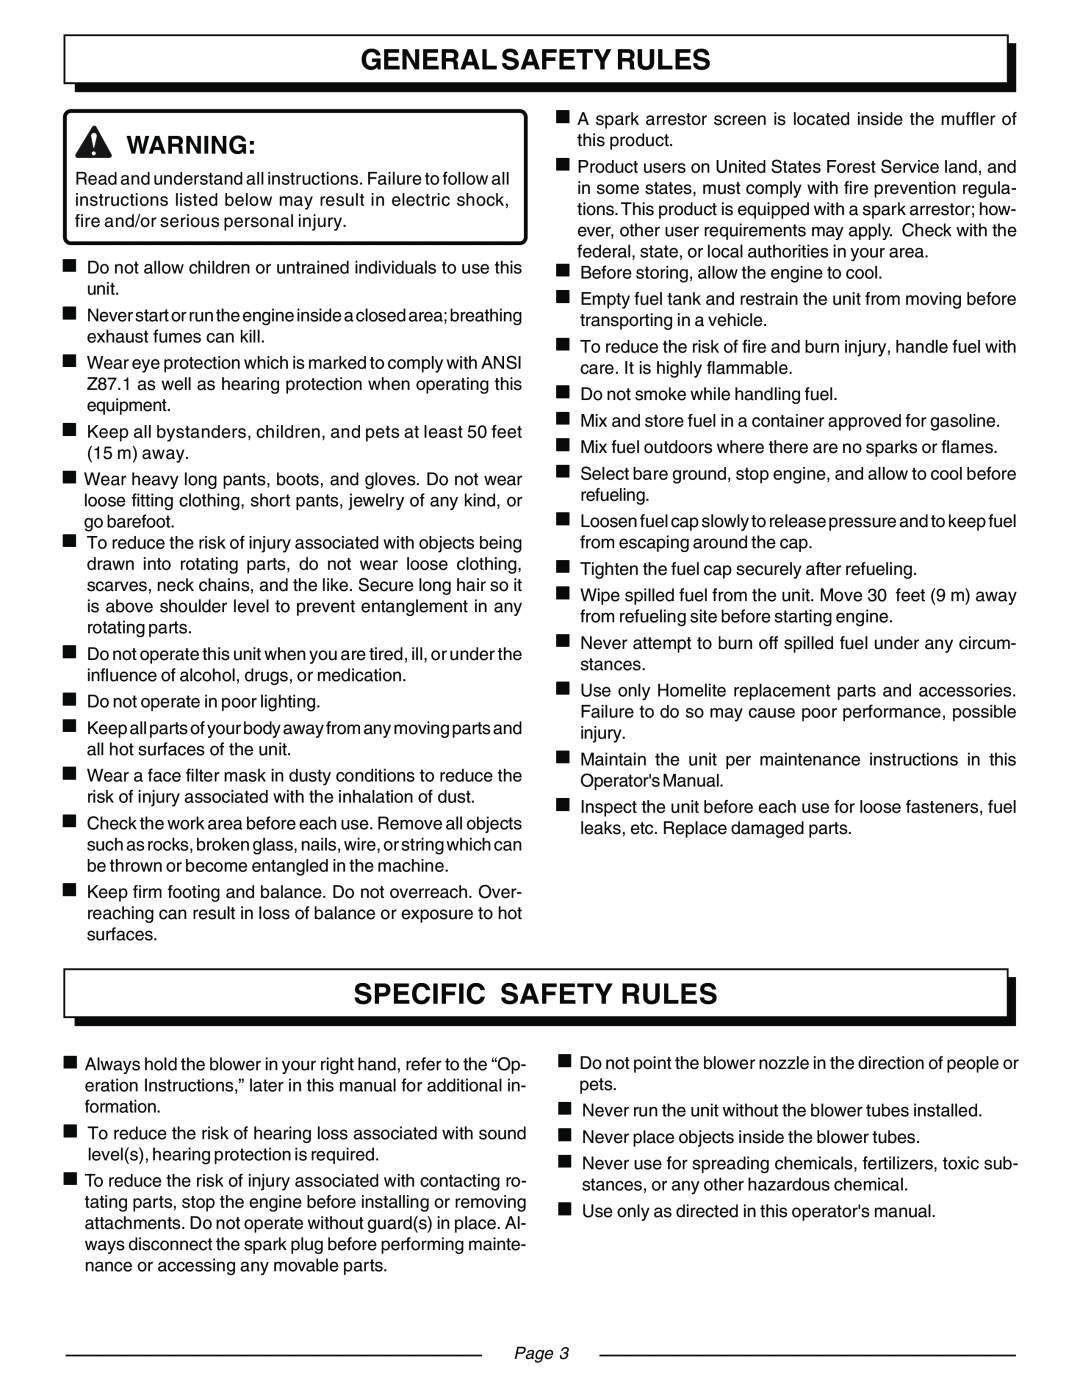 Homelite UT08120B, UT08931 manual General Safety Rules, Specific Safety Rules, Page 